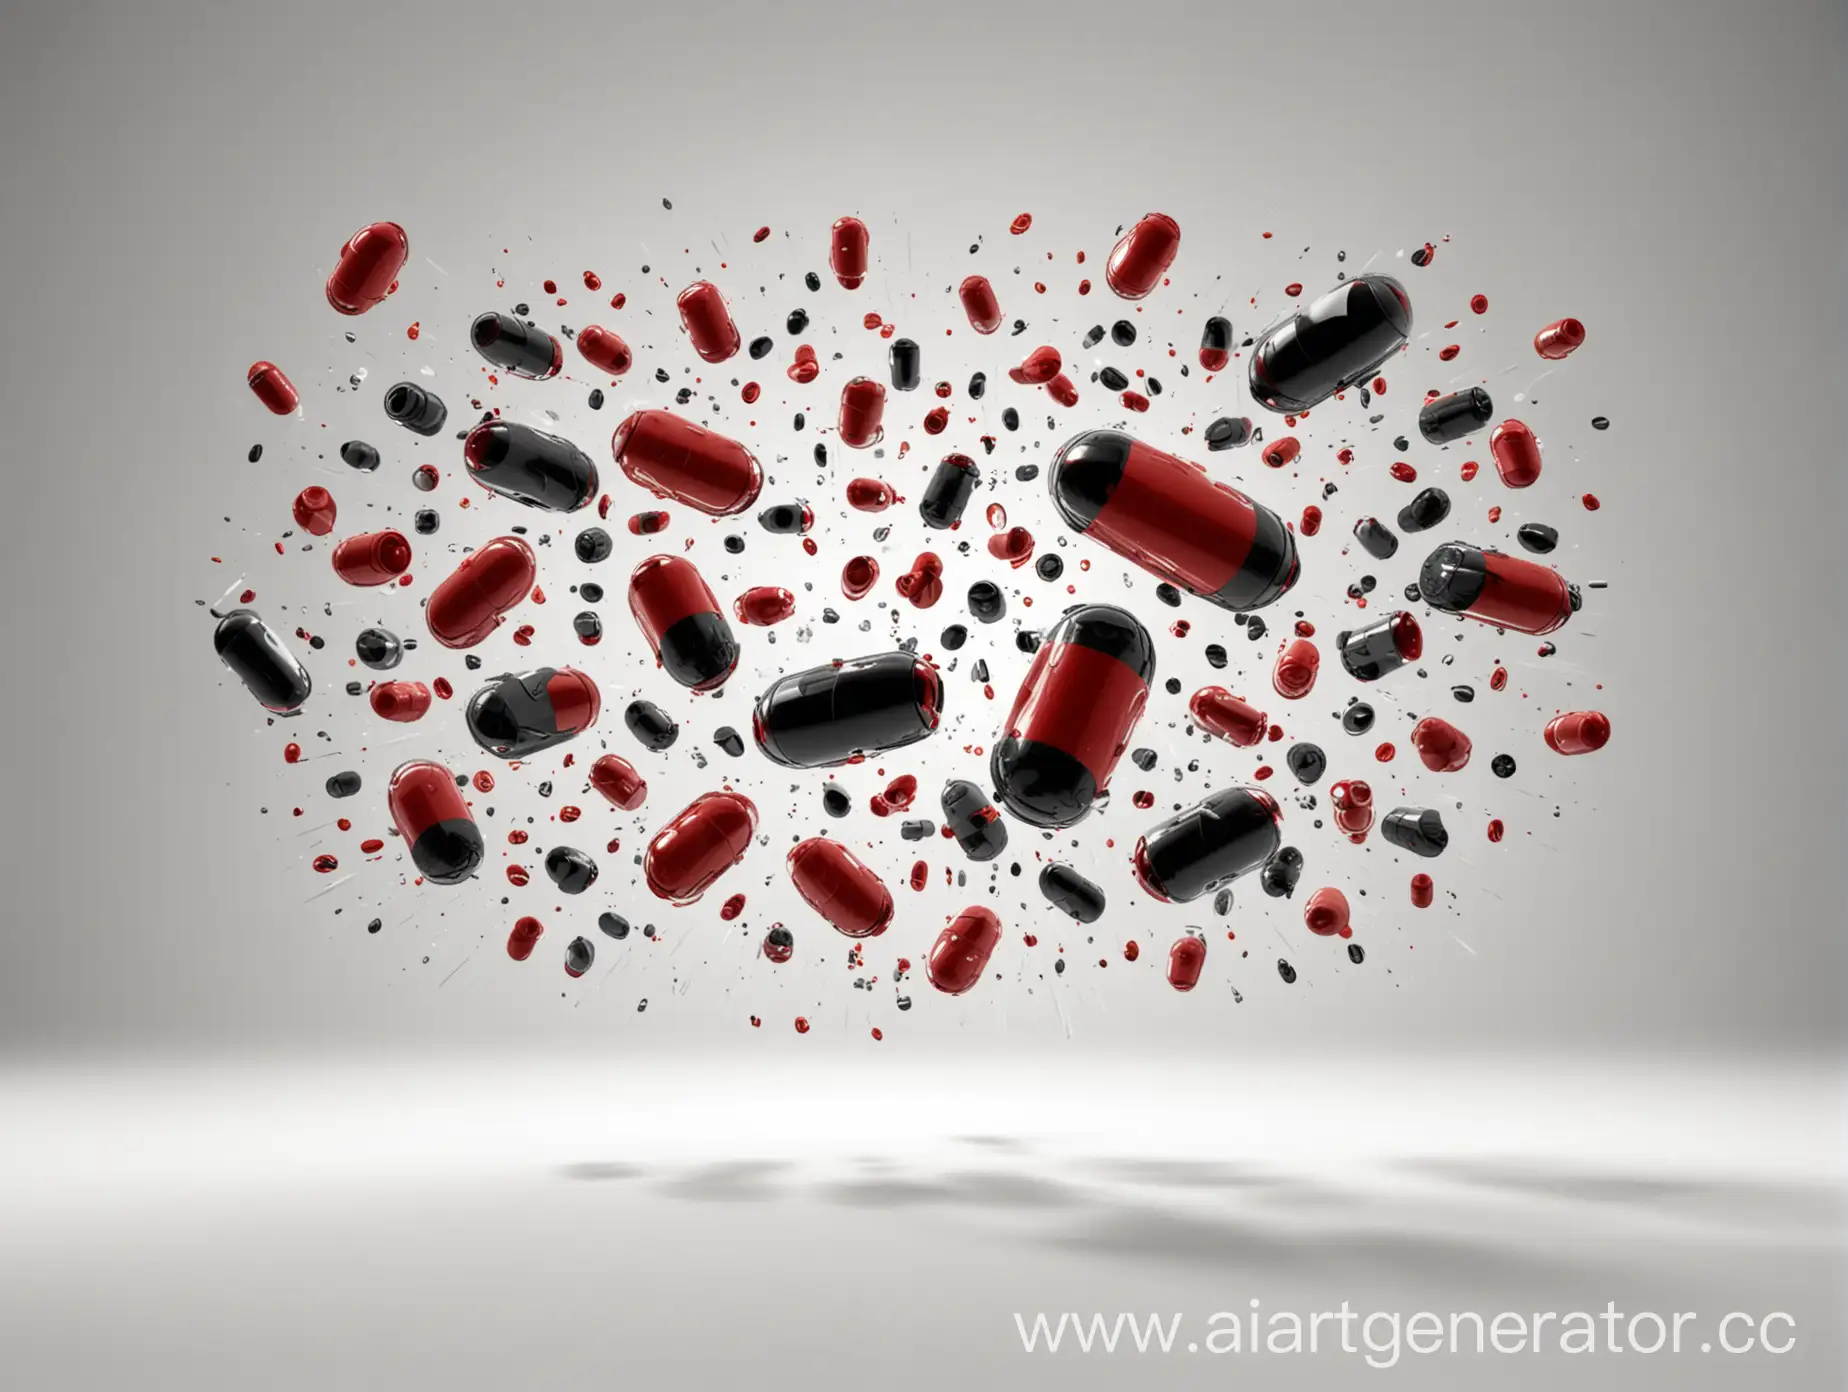 Red-and-Black-Tablets-and-Capsules-Colliding-on-White-Background-with-Shadows